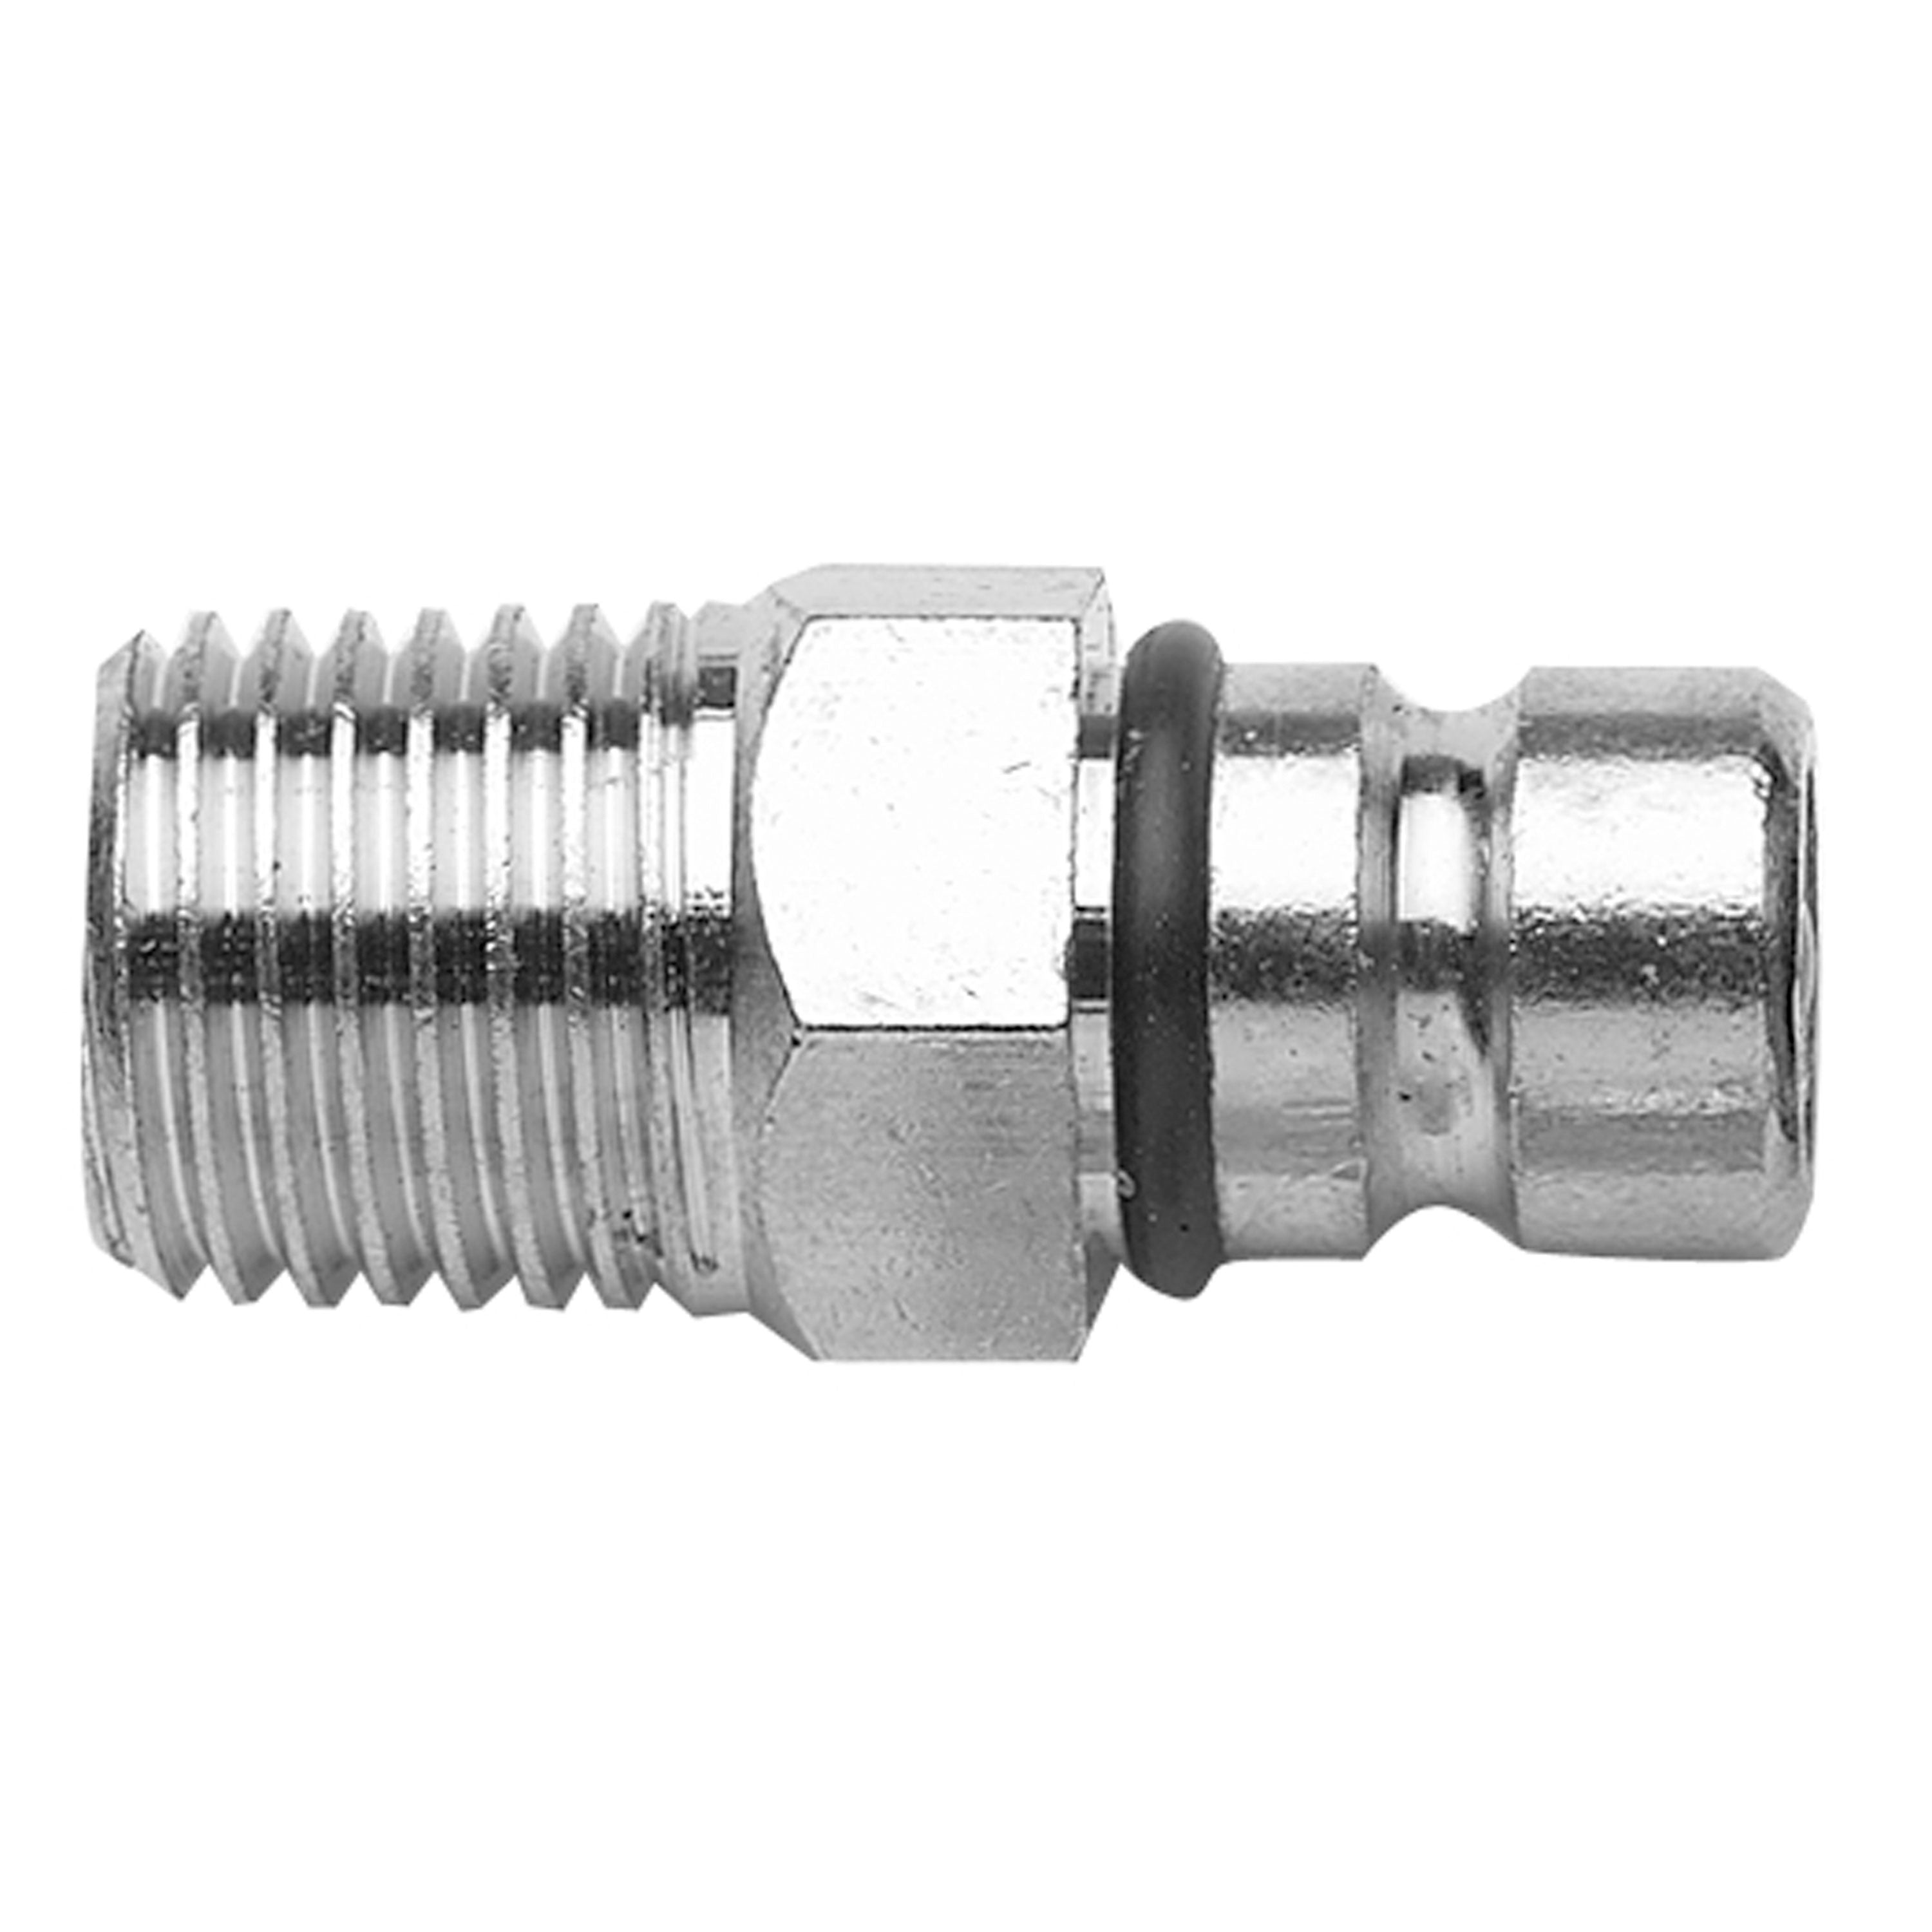 Moeller 033461-10 Chrome Plated Brass Male 1/4" NPT Fuel Engine Connector for Chrysler/Force